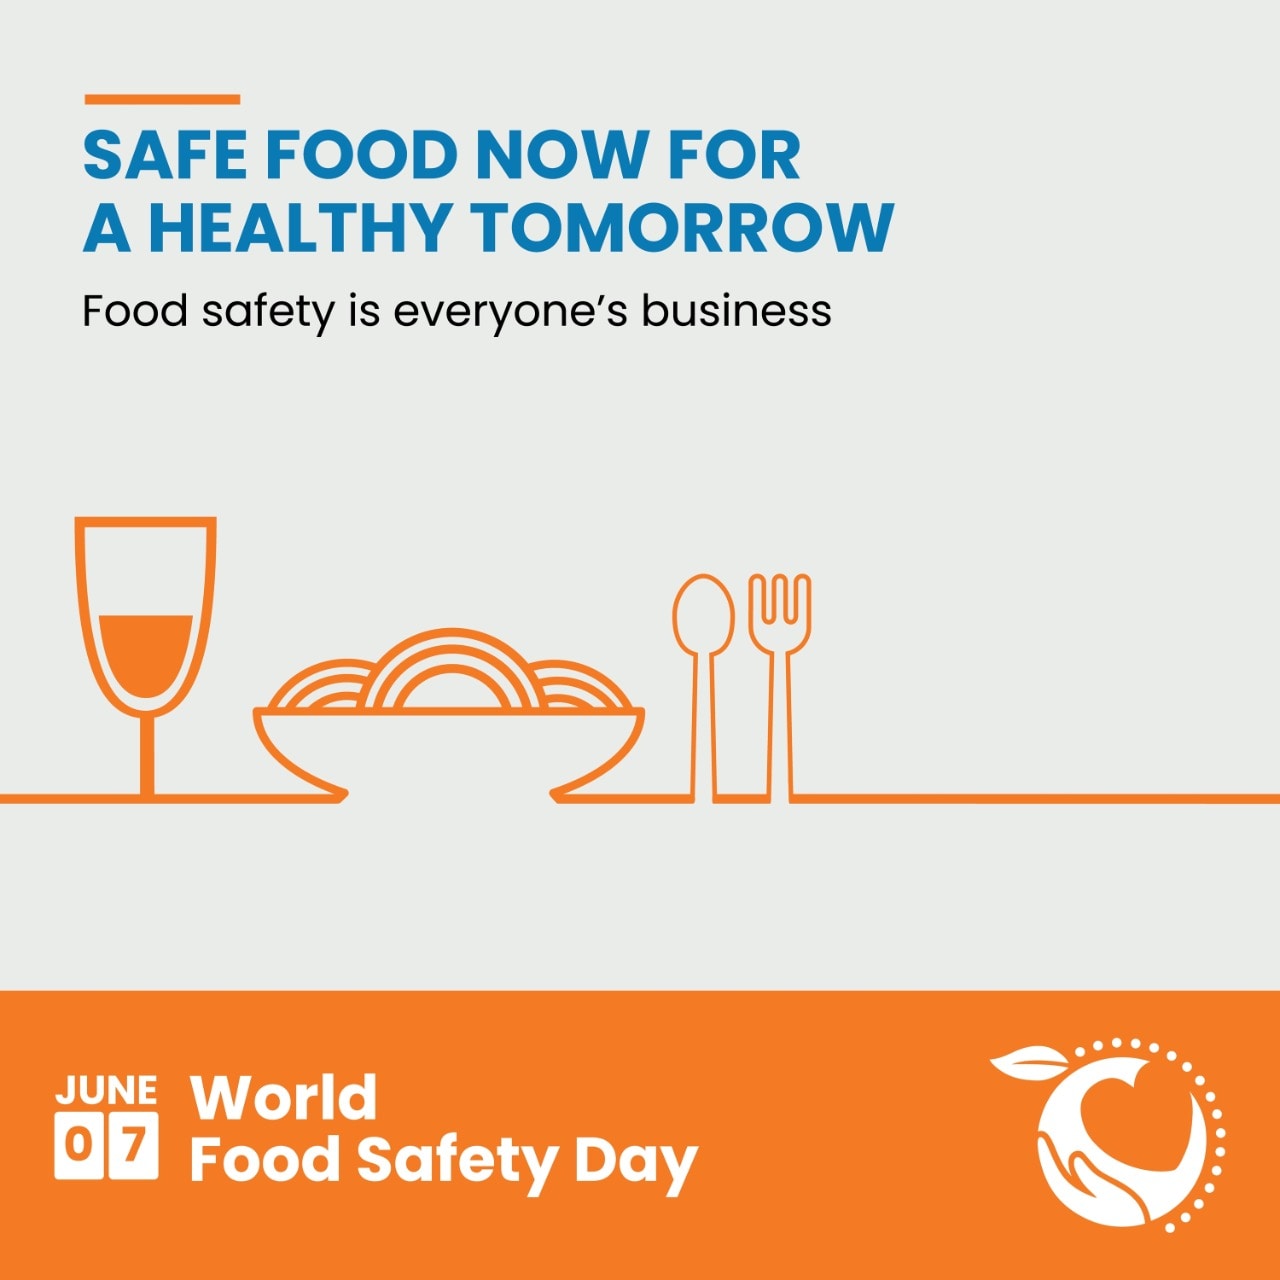 Happy World Food Safety Day 2022: Wishes, messages, quotes, greetings, SMS, WhatsApp and Facebook status to share with your family and friends. (Image: Shutterstock)